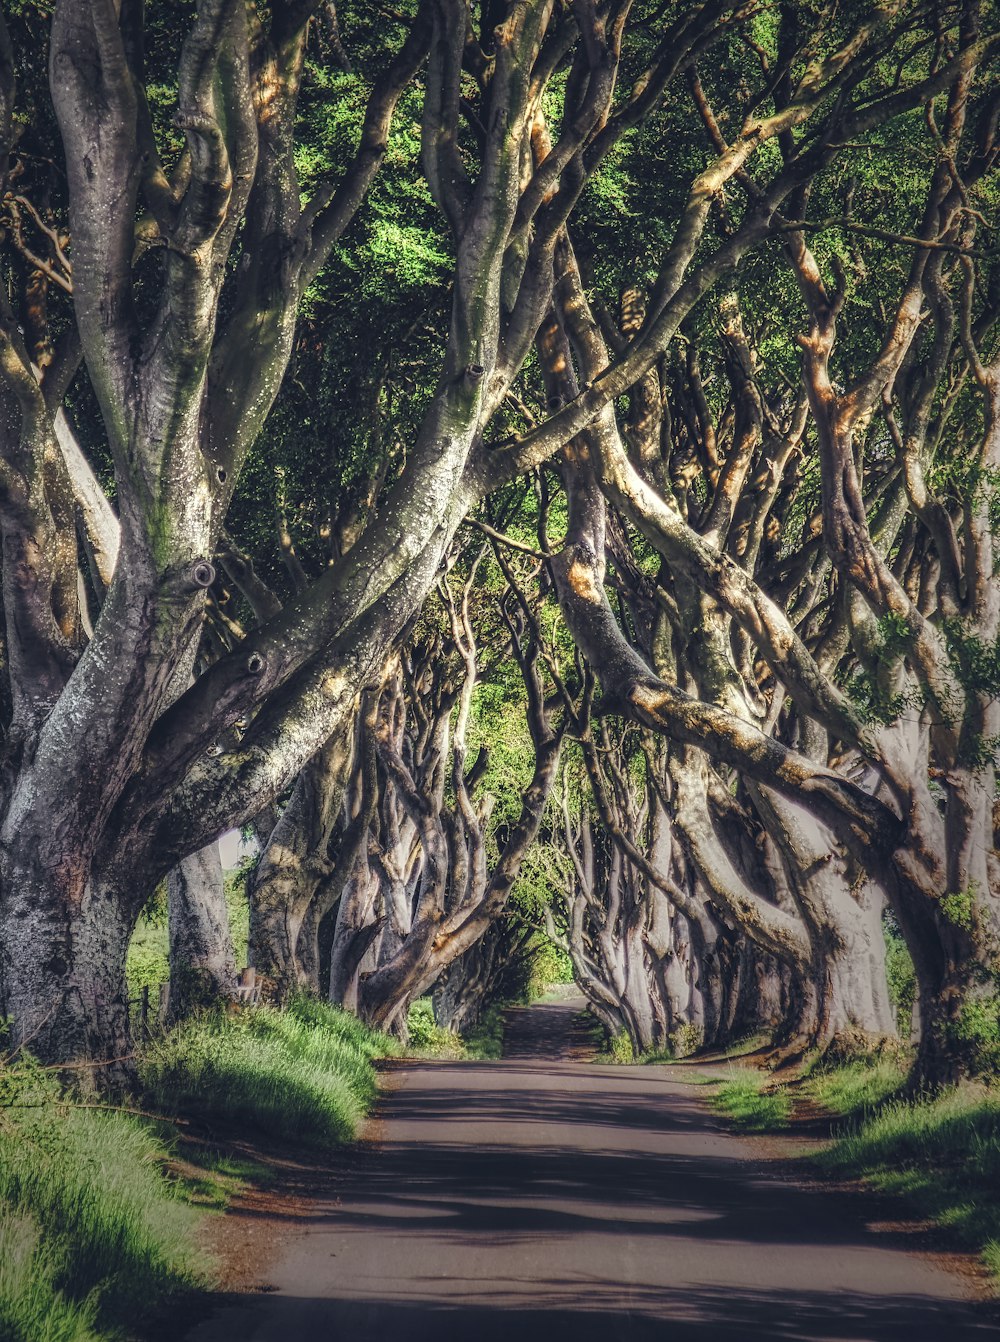 Brown Trees On Green Grass Field During Daytime Photo Free The Dark Hedges Image On Unsplash